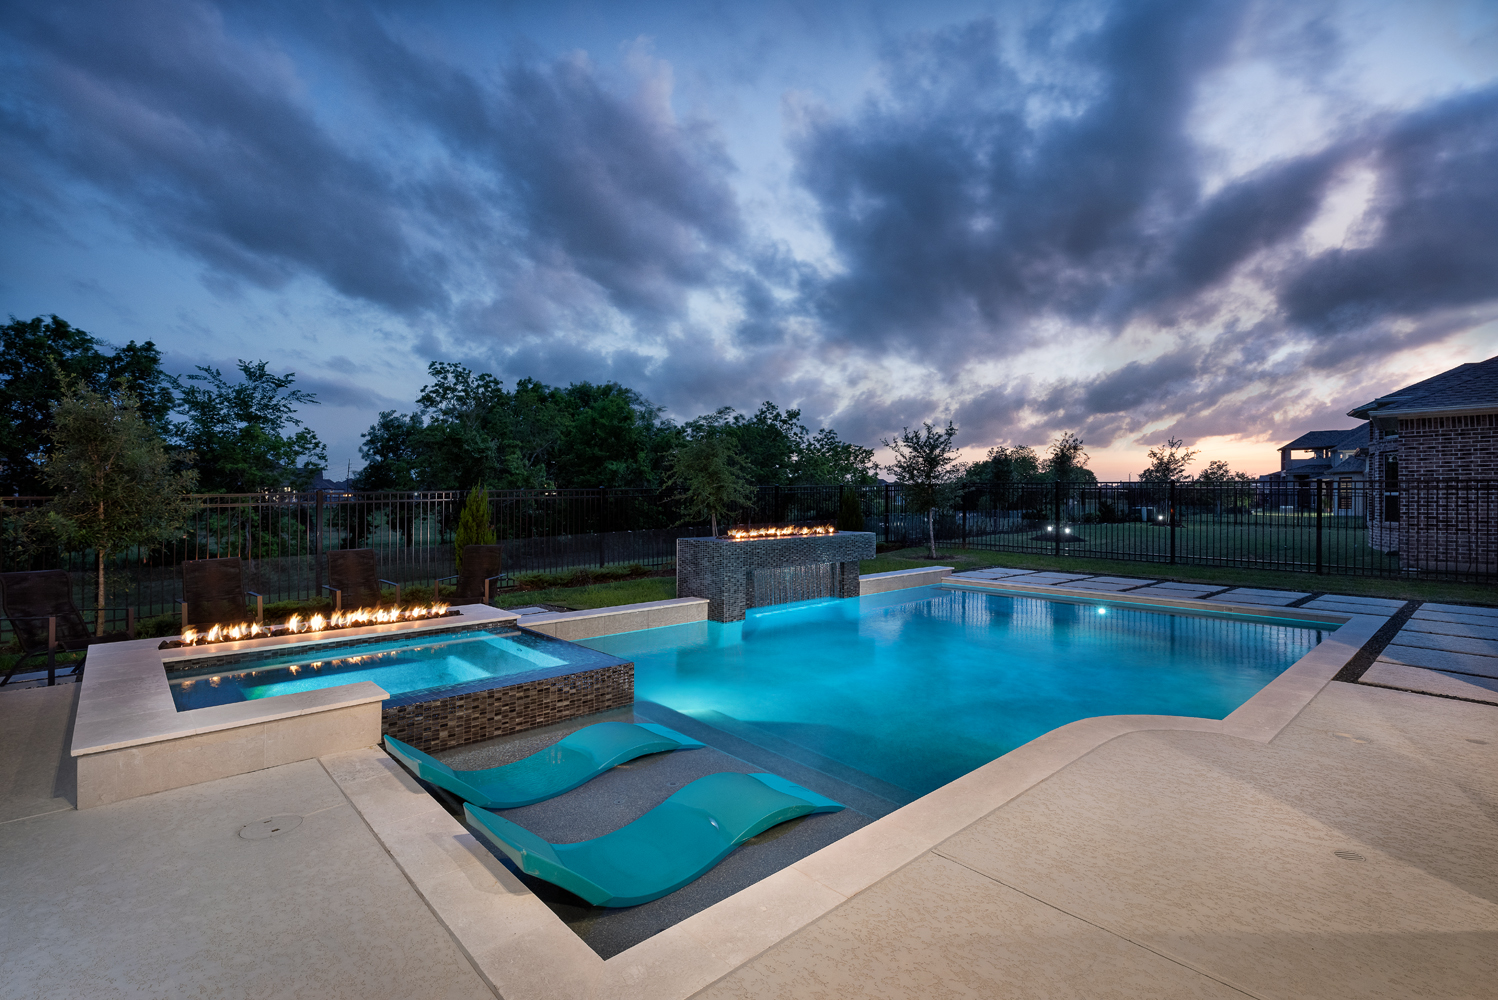 a pool at sunset